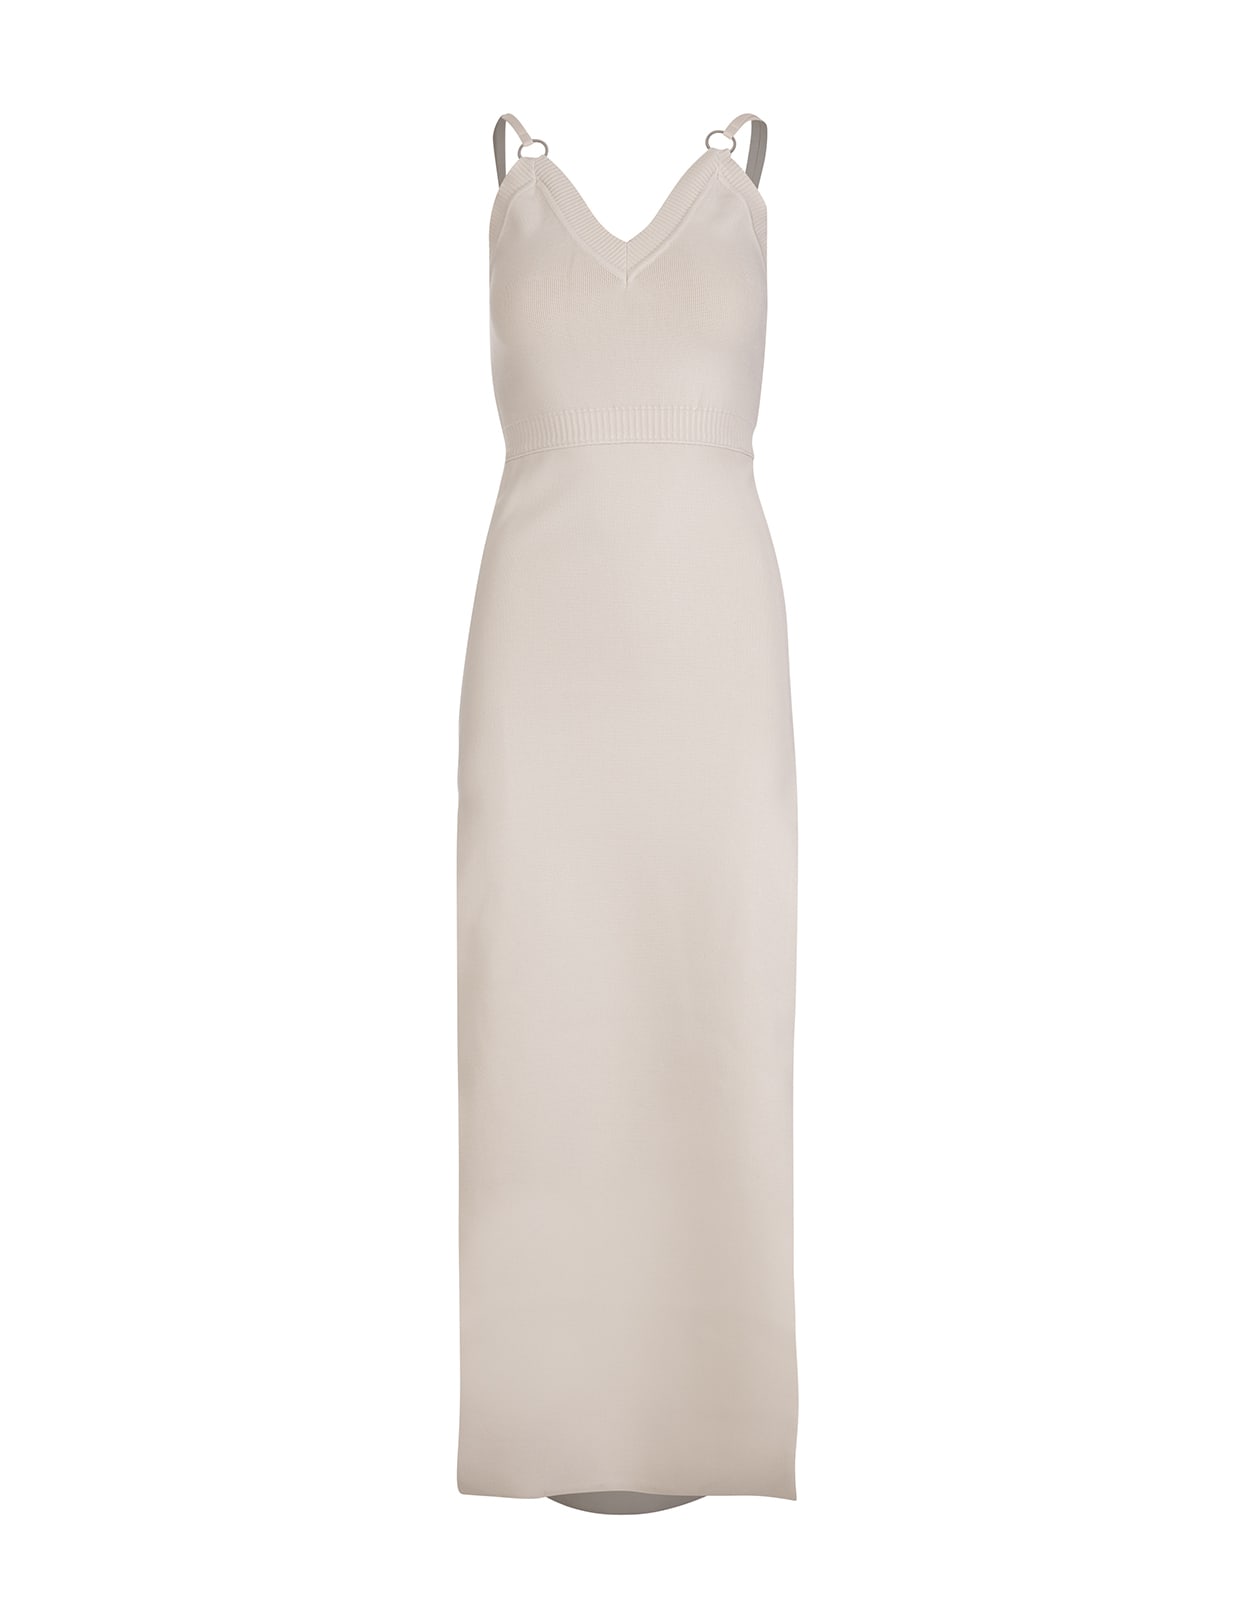 Paco Rabanne Light Beige Long Jersey Dress With Side Slits And Metallic Rings